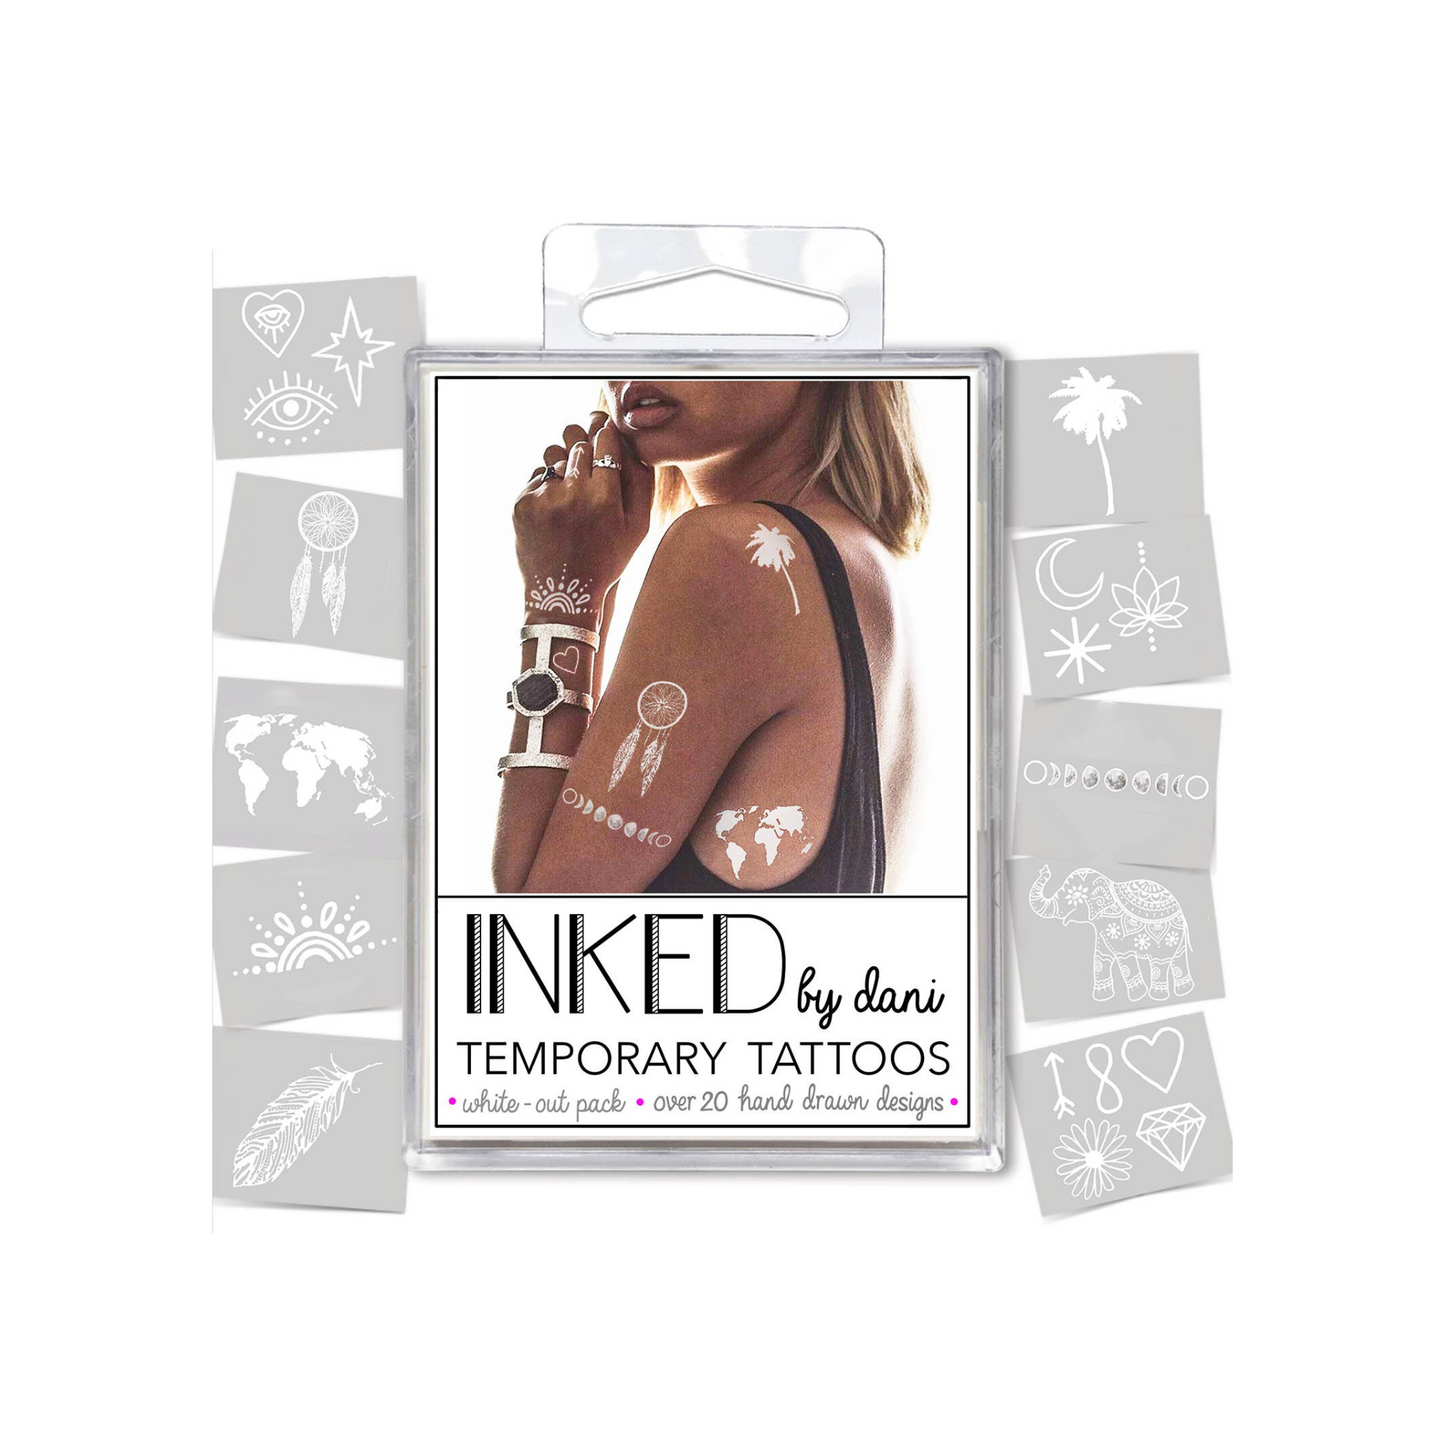 temporary tattoo pack featuring white ink designs